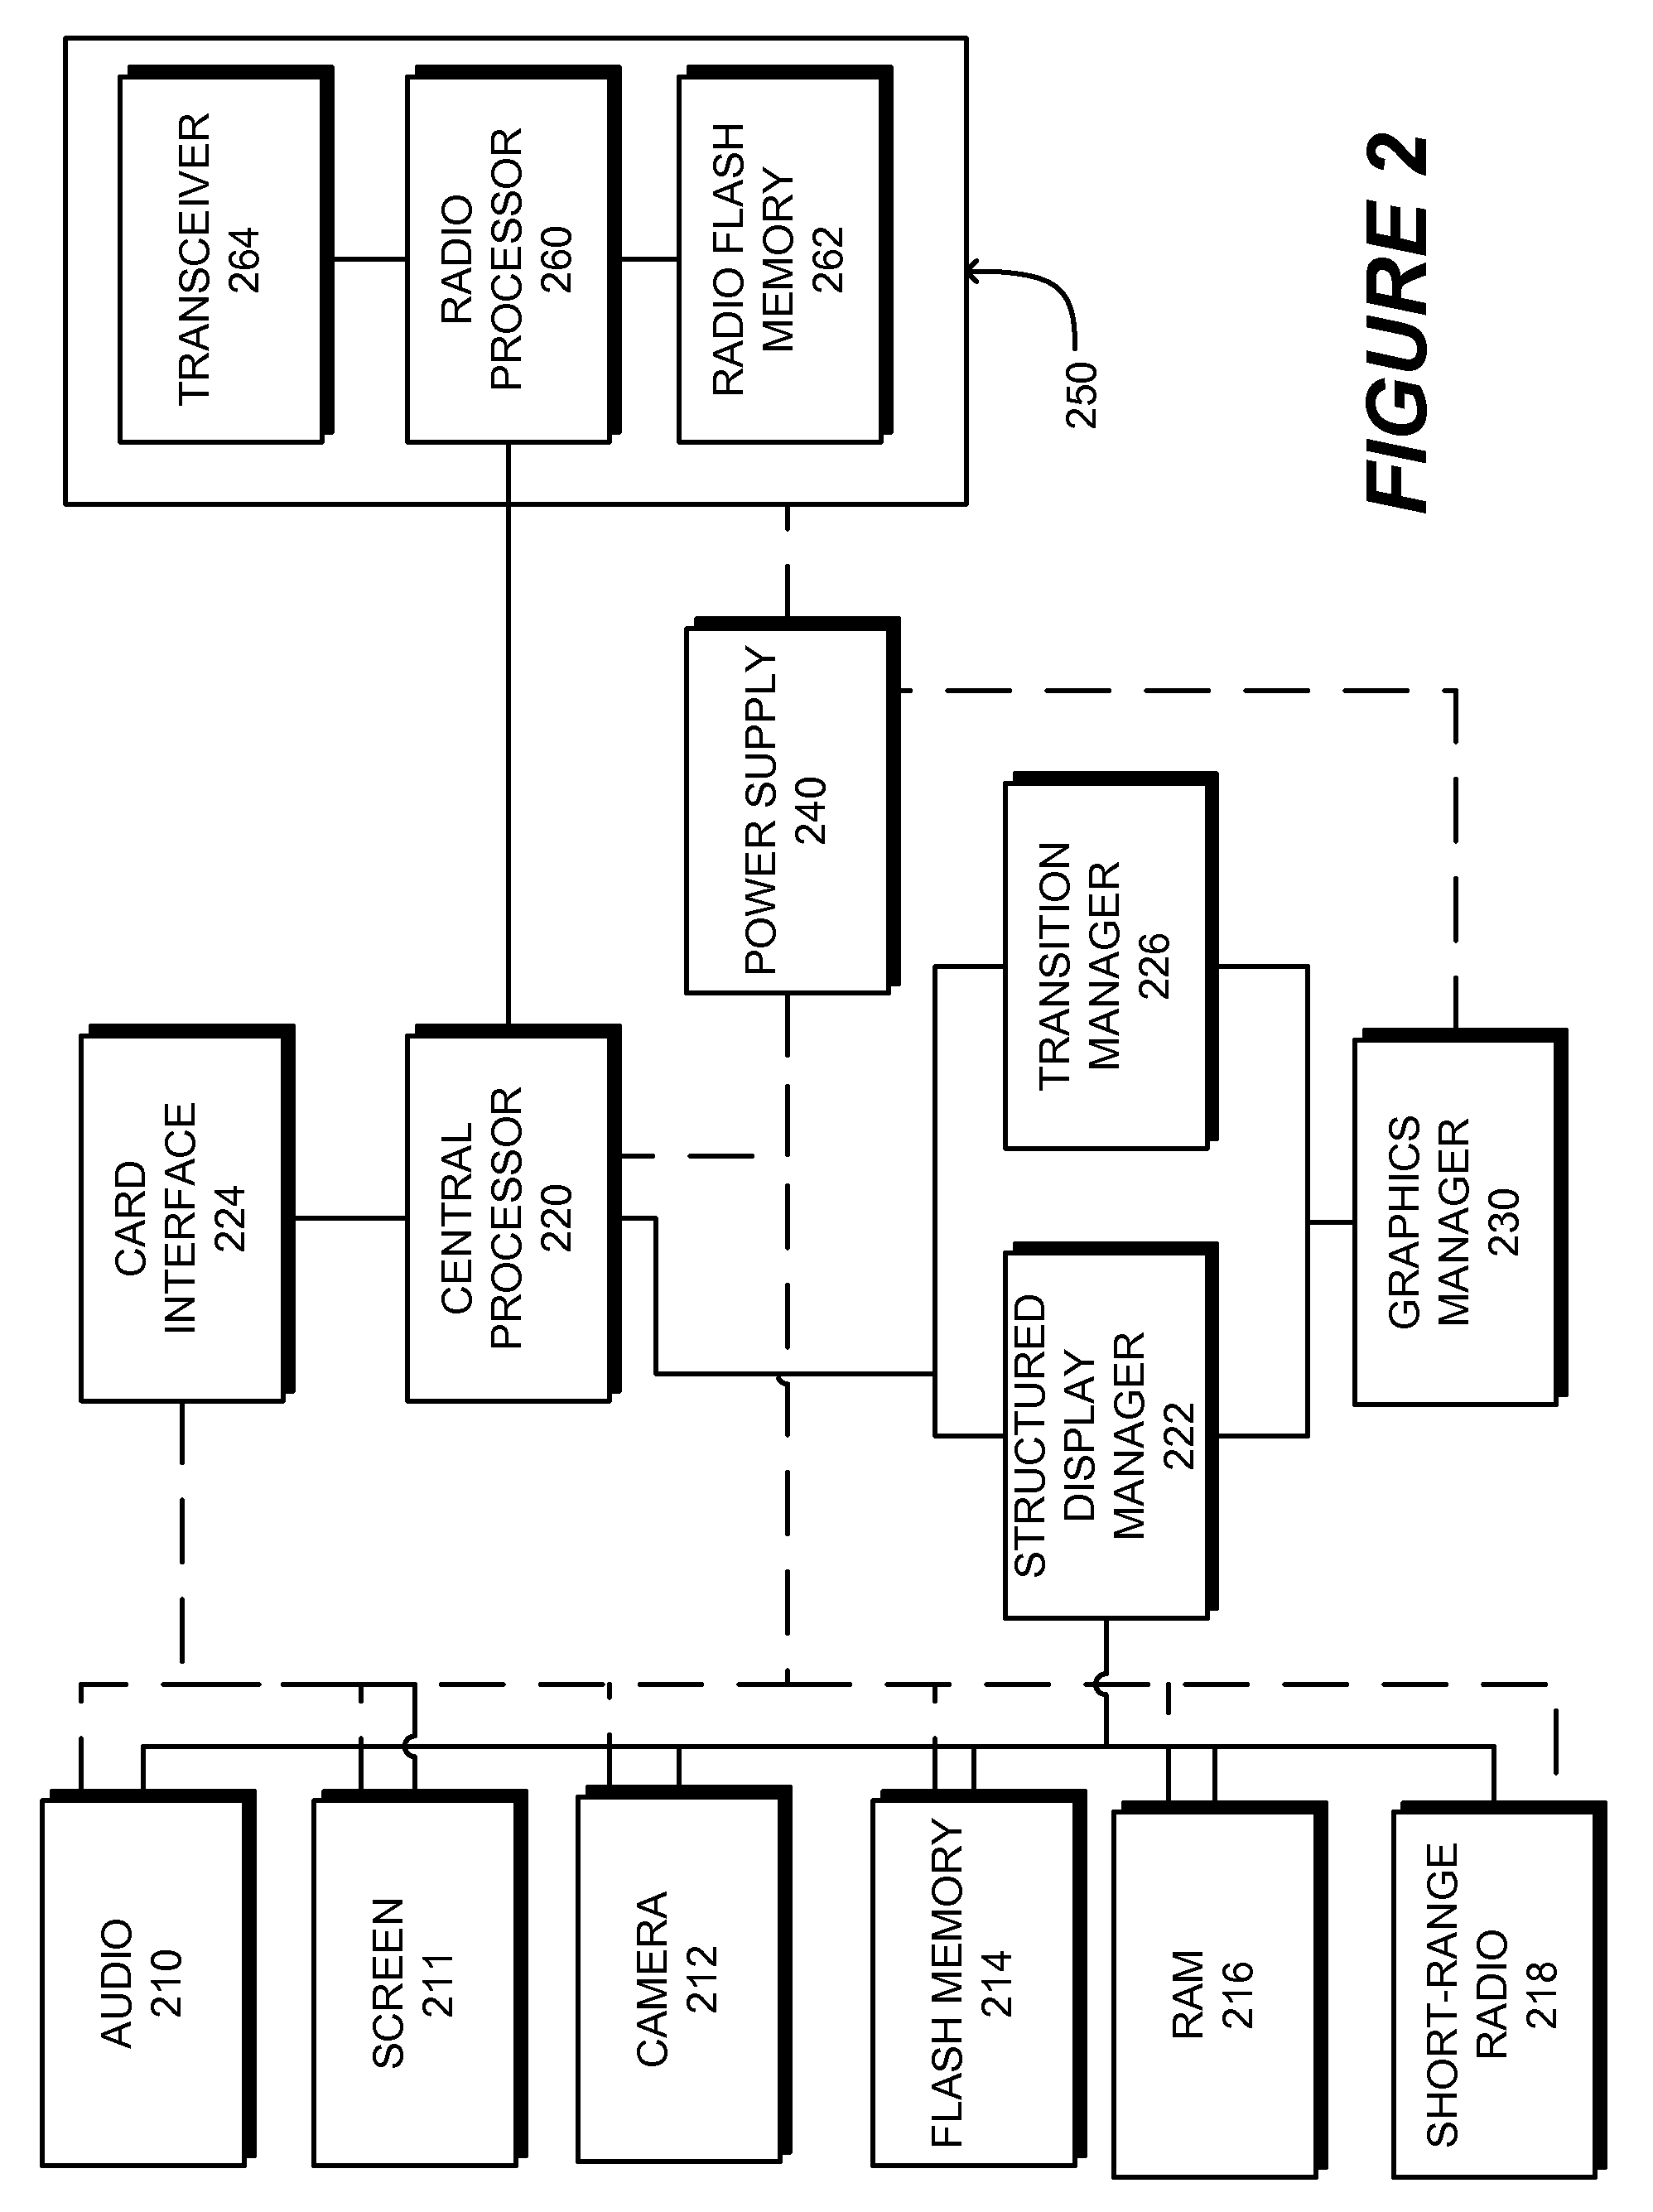 Structured Display System with System Defined Transitions